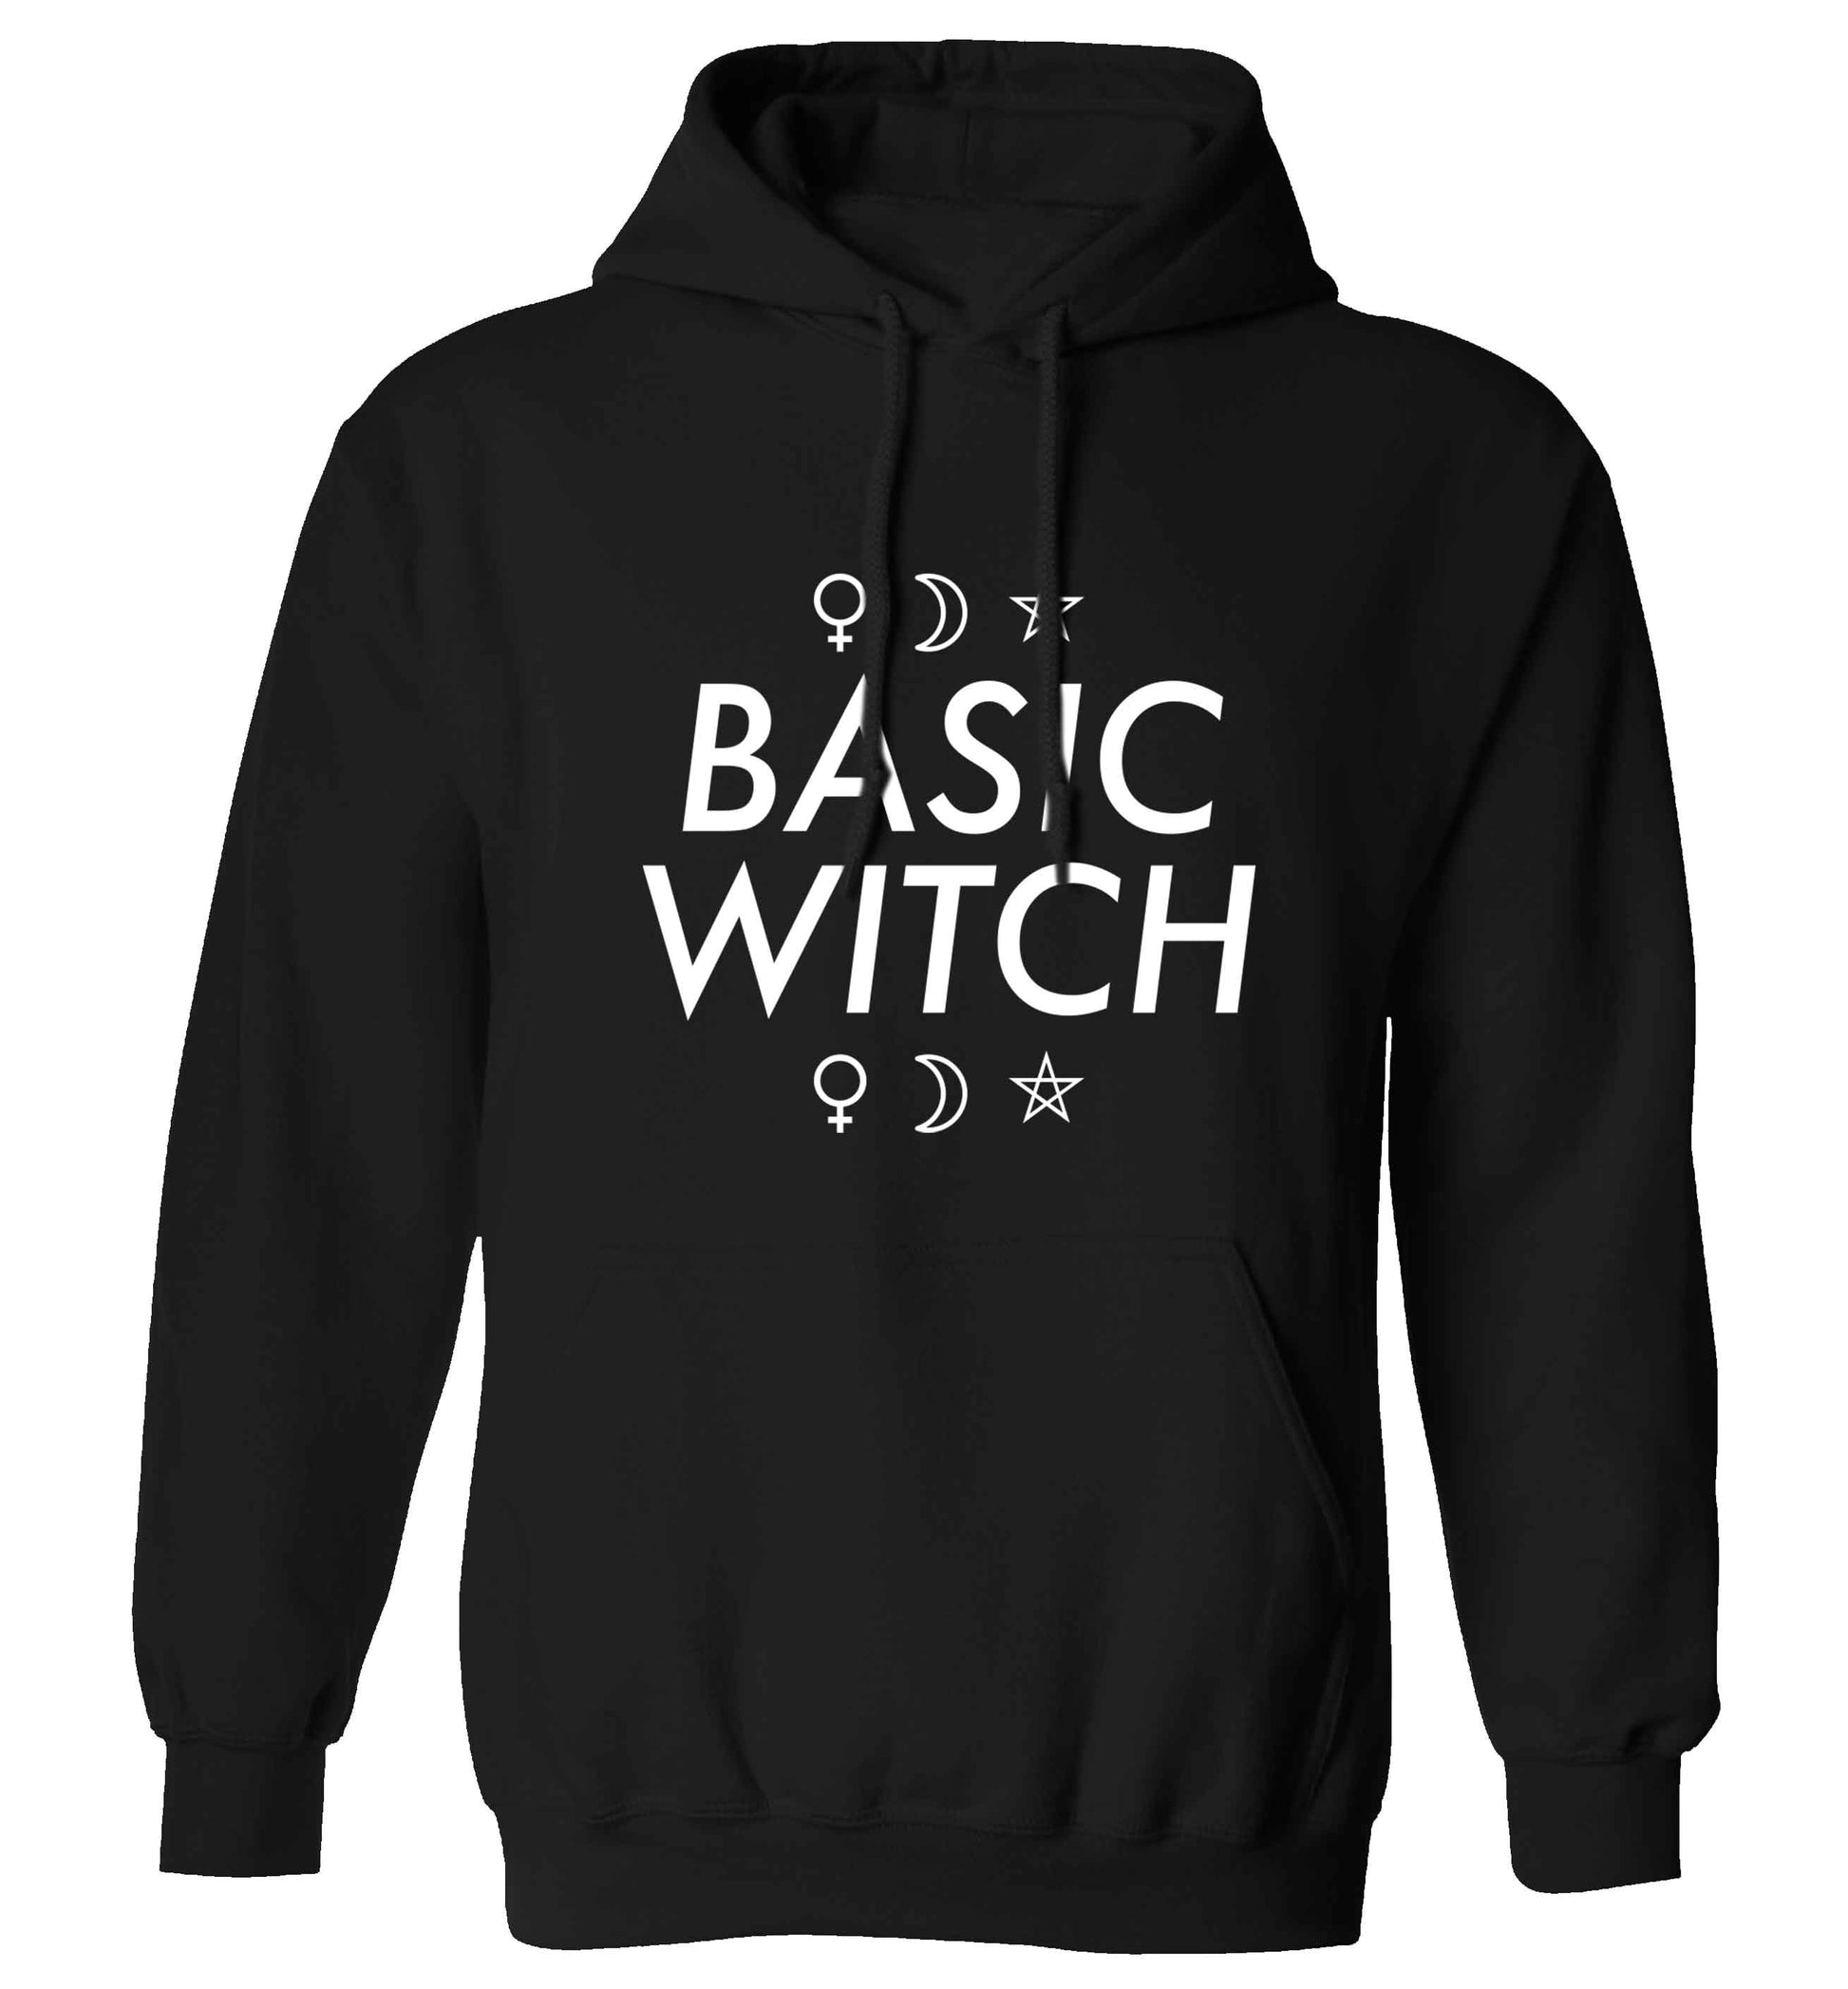 Basic witch 1 adults unisex black hoodie 2XL